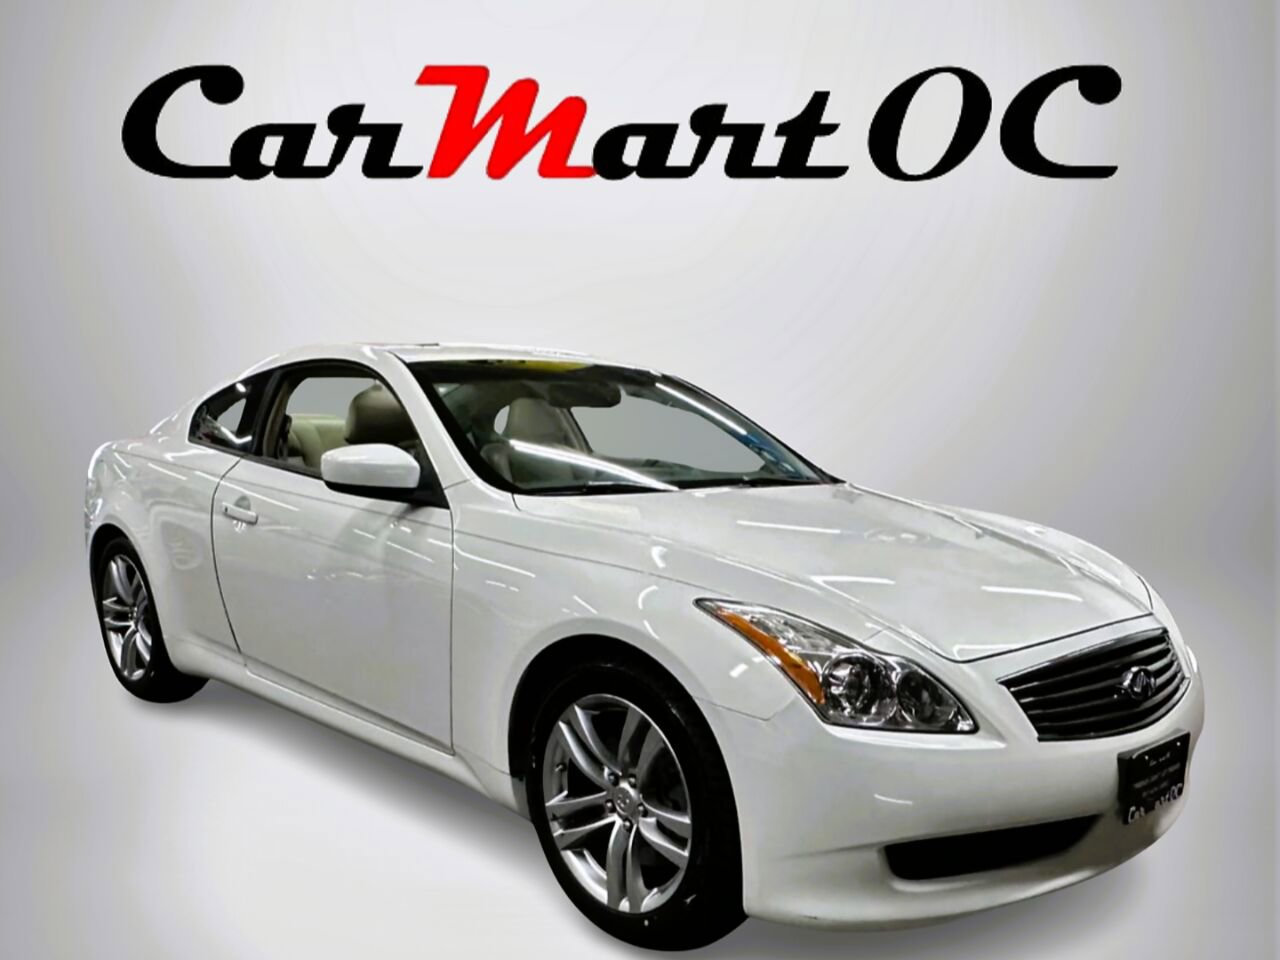 Used INFINITI G37 Coupes for Sale Right Now - Autotrader